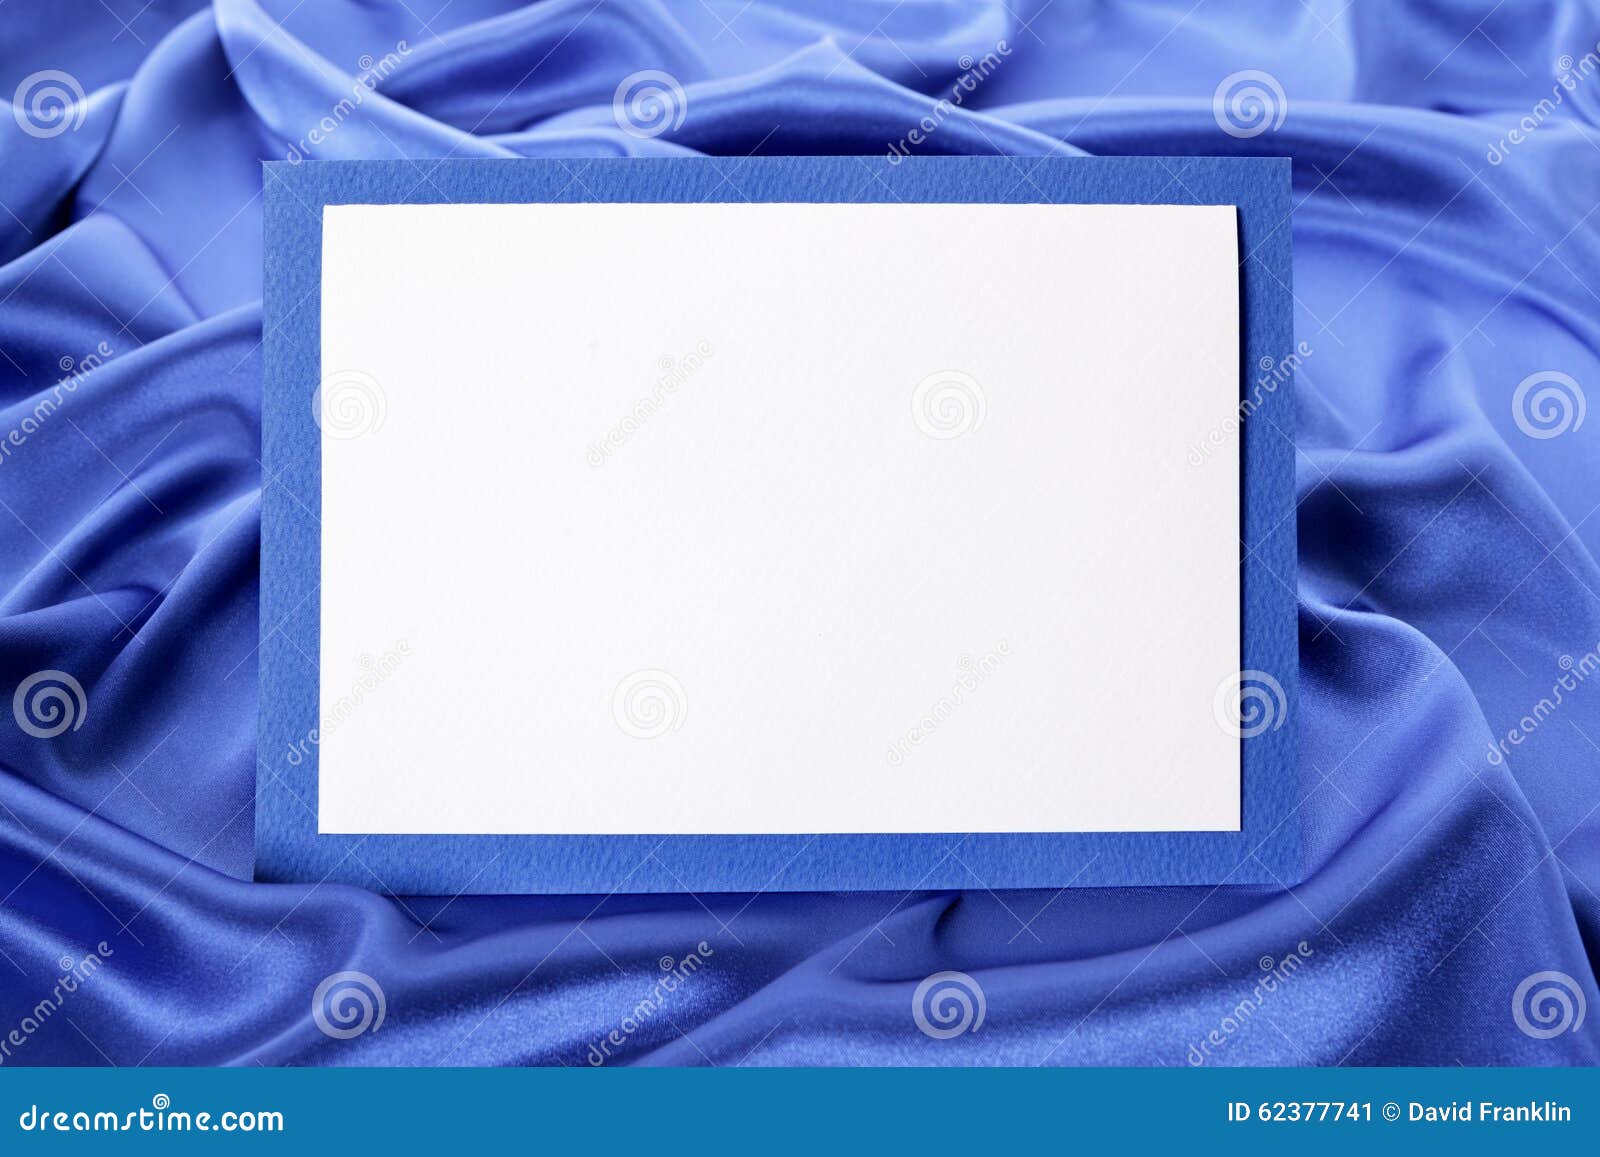 blank christmas or birthday greetings card or invitation with blue satin background, copy space